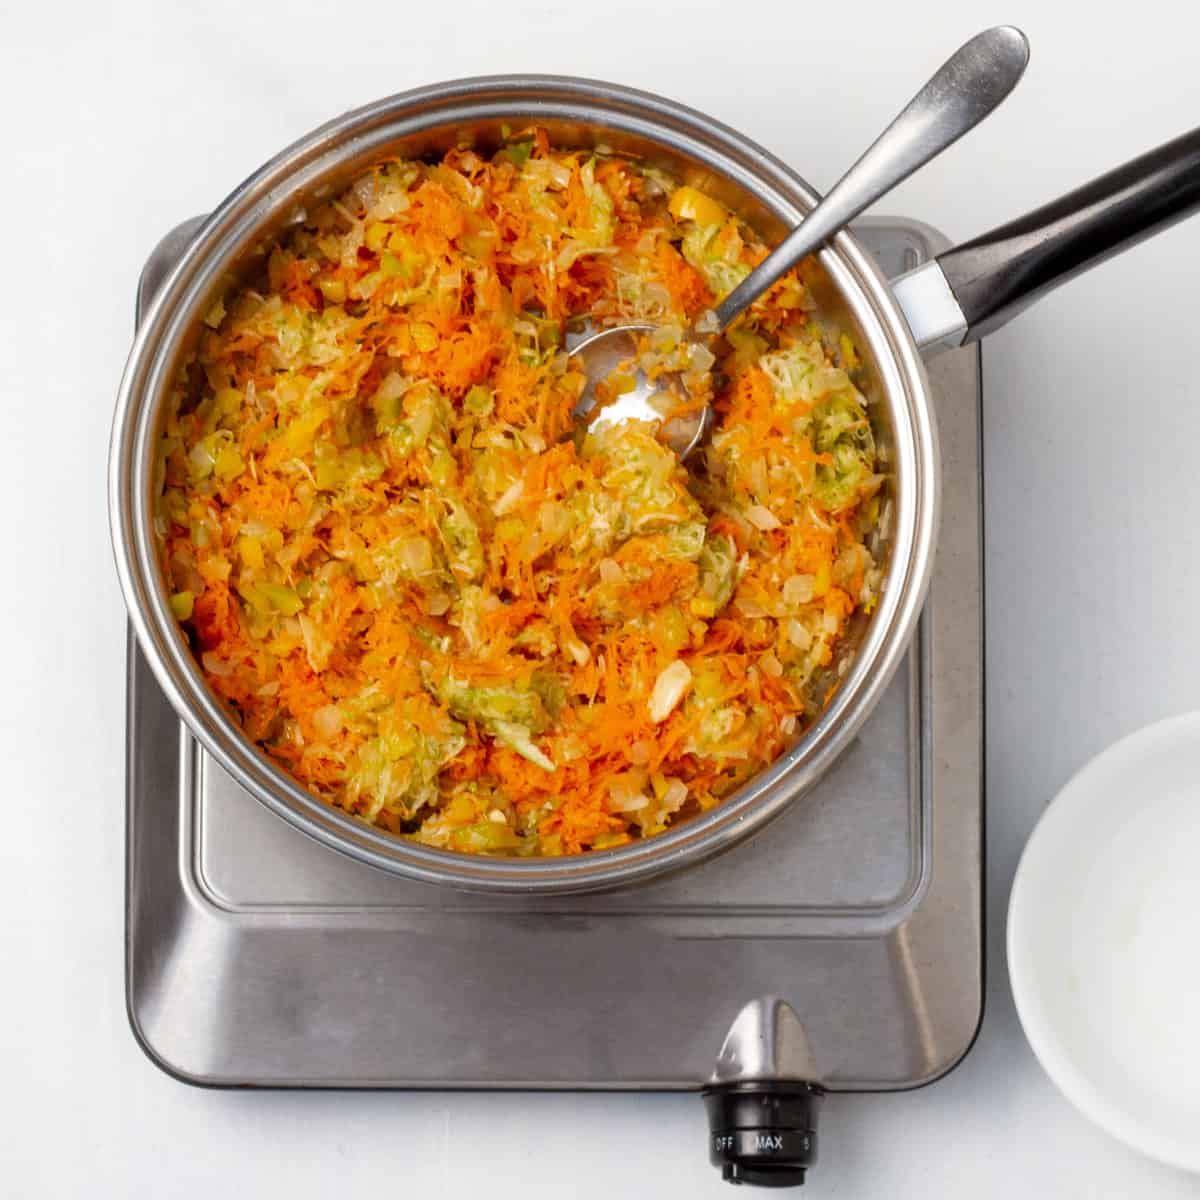 Sauté the chopped onion, garlic, bell pepper, grated carrot, and zucchini